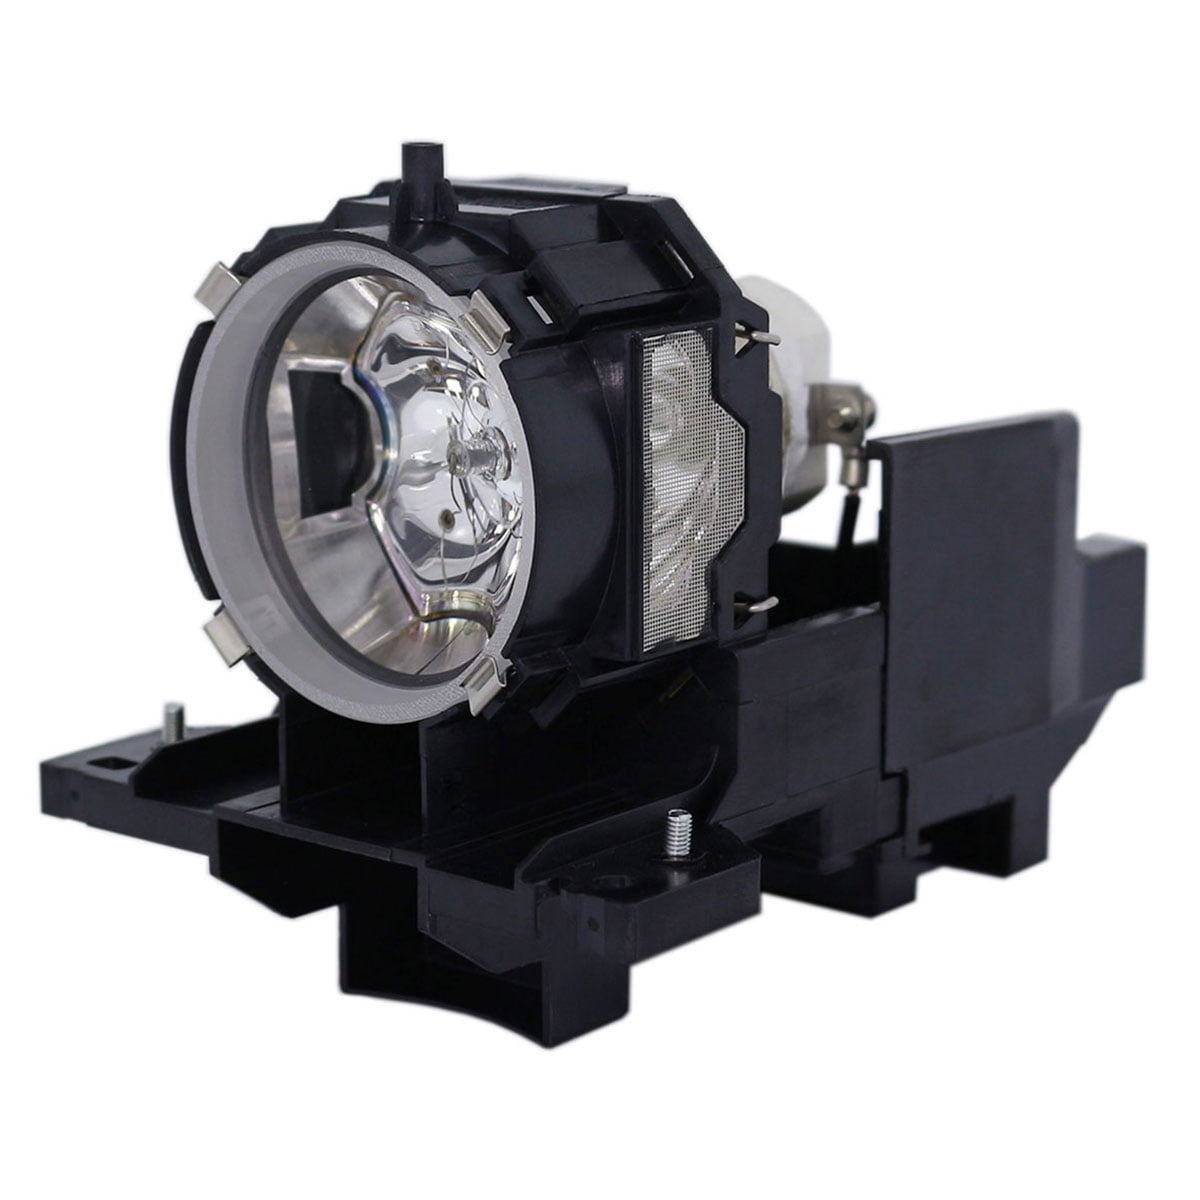 Lutema Economy for Hitachi DT00871 Projector Lamp with Housing